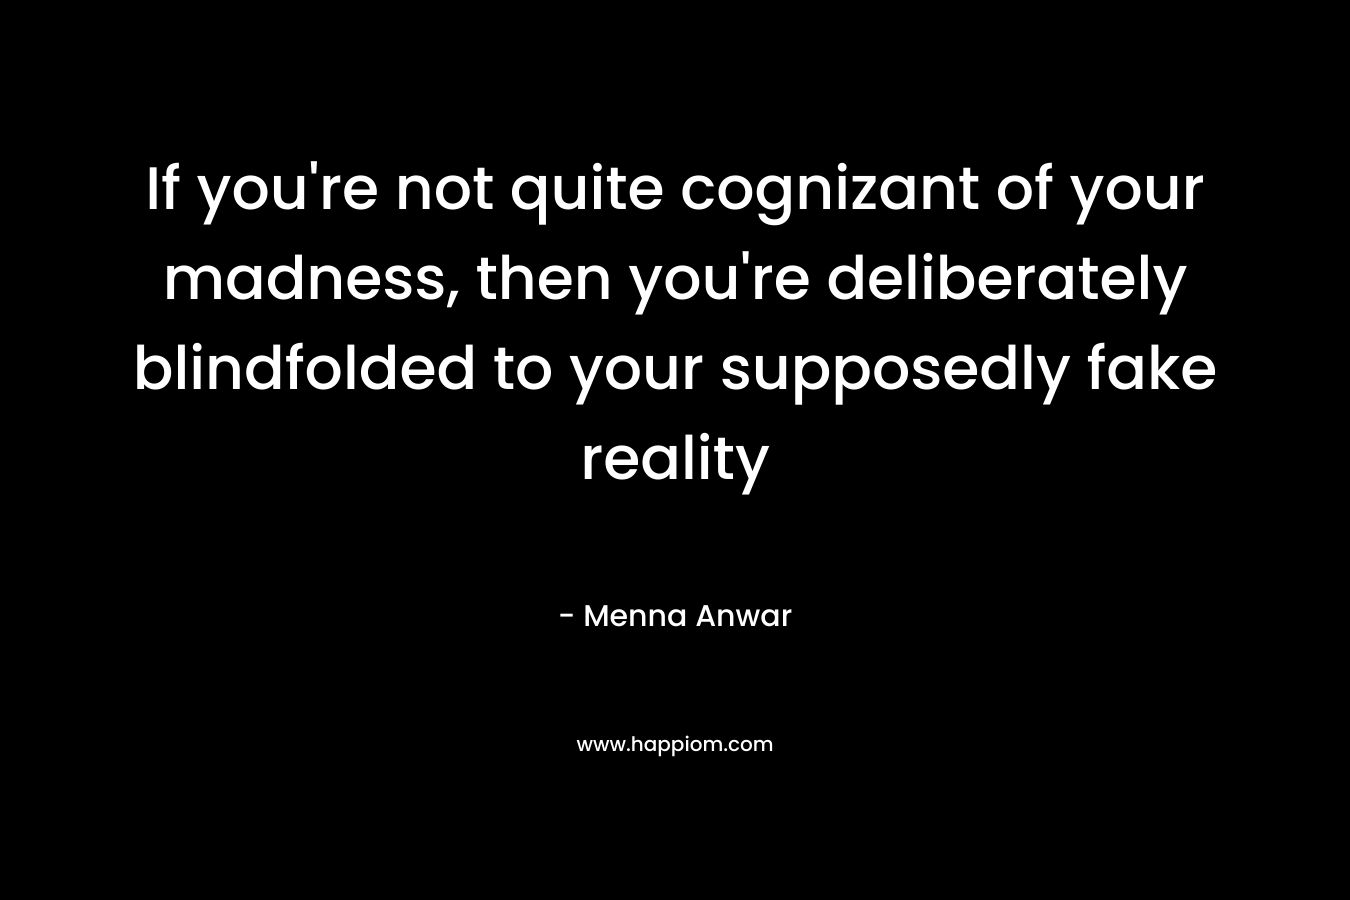 If you're not quite cognizant of your madness, then you're deliberately blindfolded to your supposedly fake reality